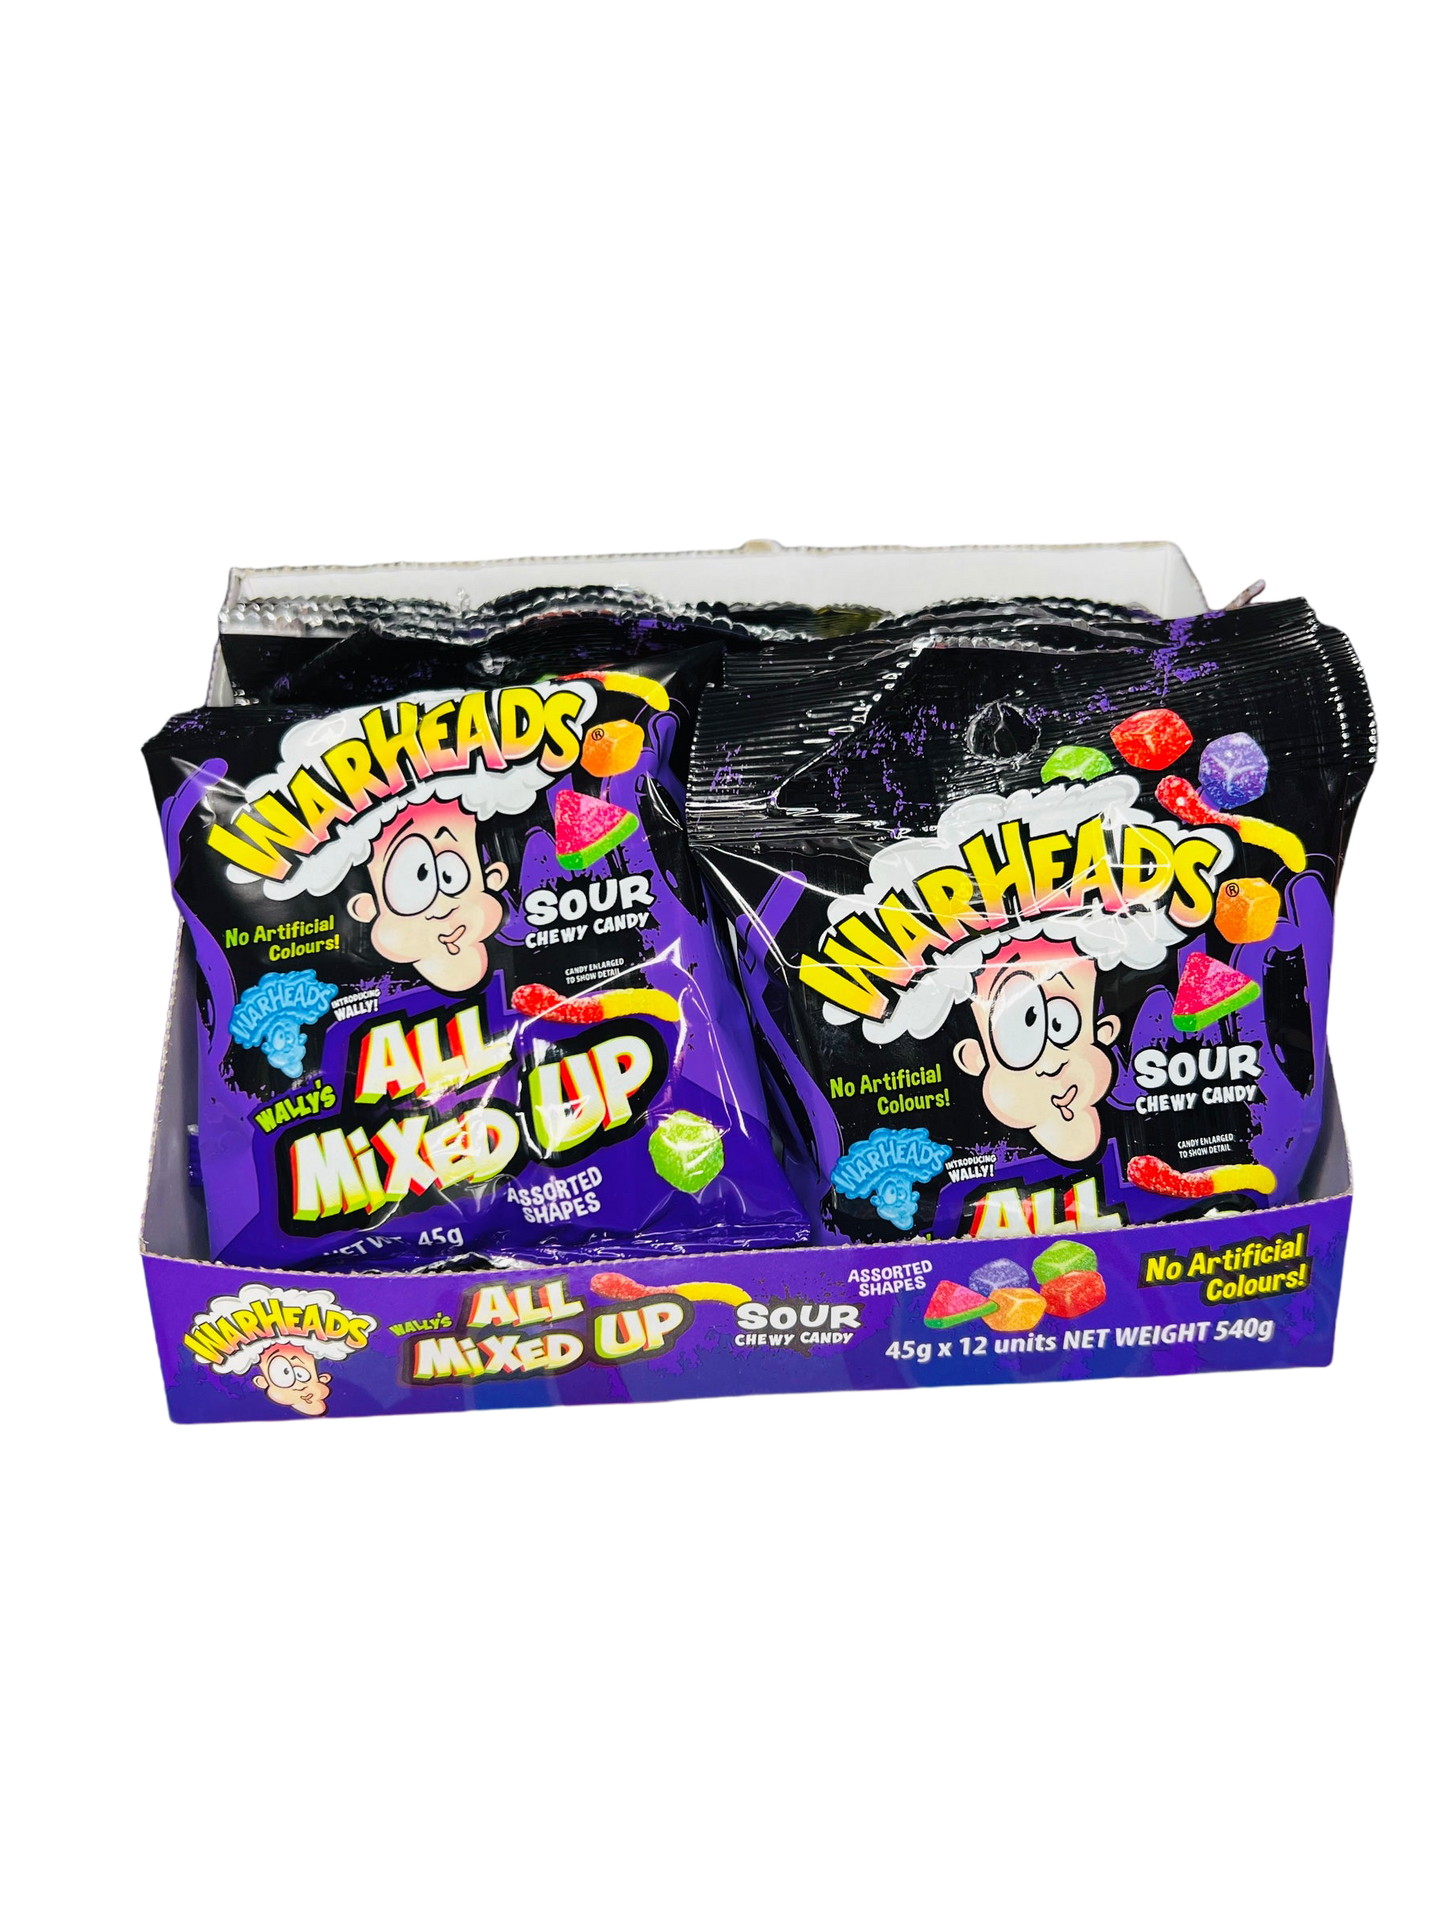 Warheads all Mixed Up (45g)